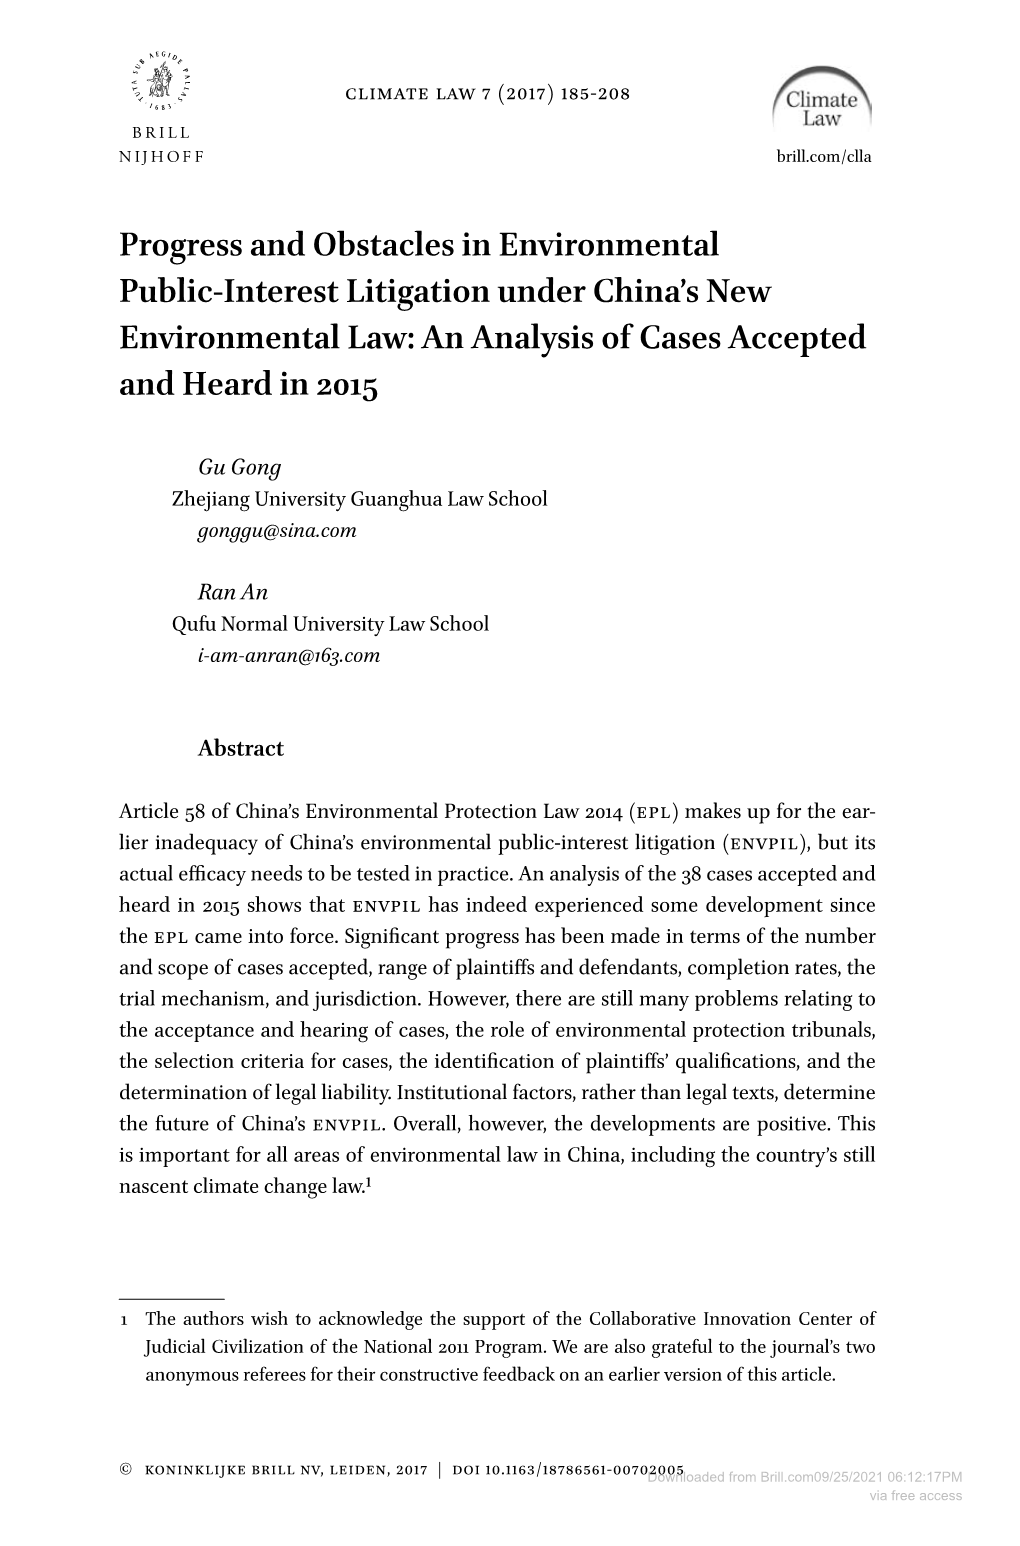 Progress and Obstacles in Environmental Public-Interest Litigation Under China’S New Environmental Law: an Analysis of Cases Accepted and Heard in 2015